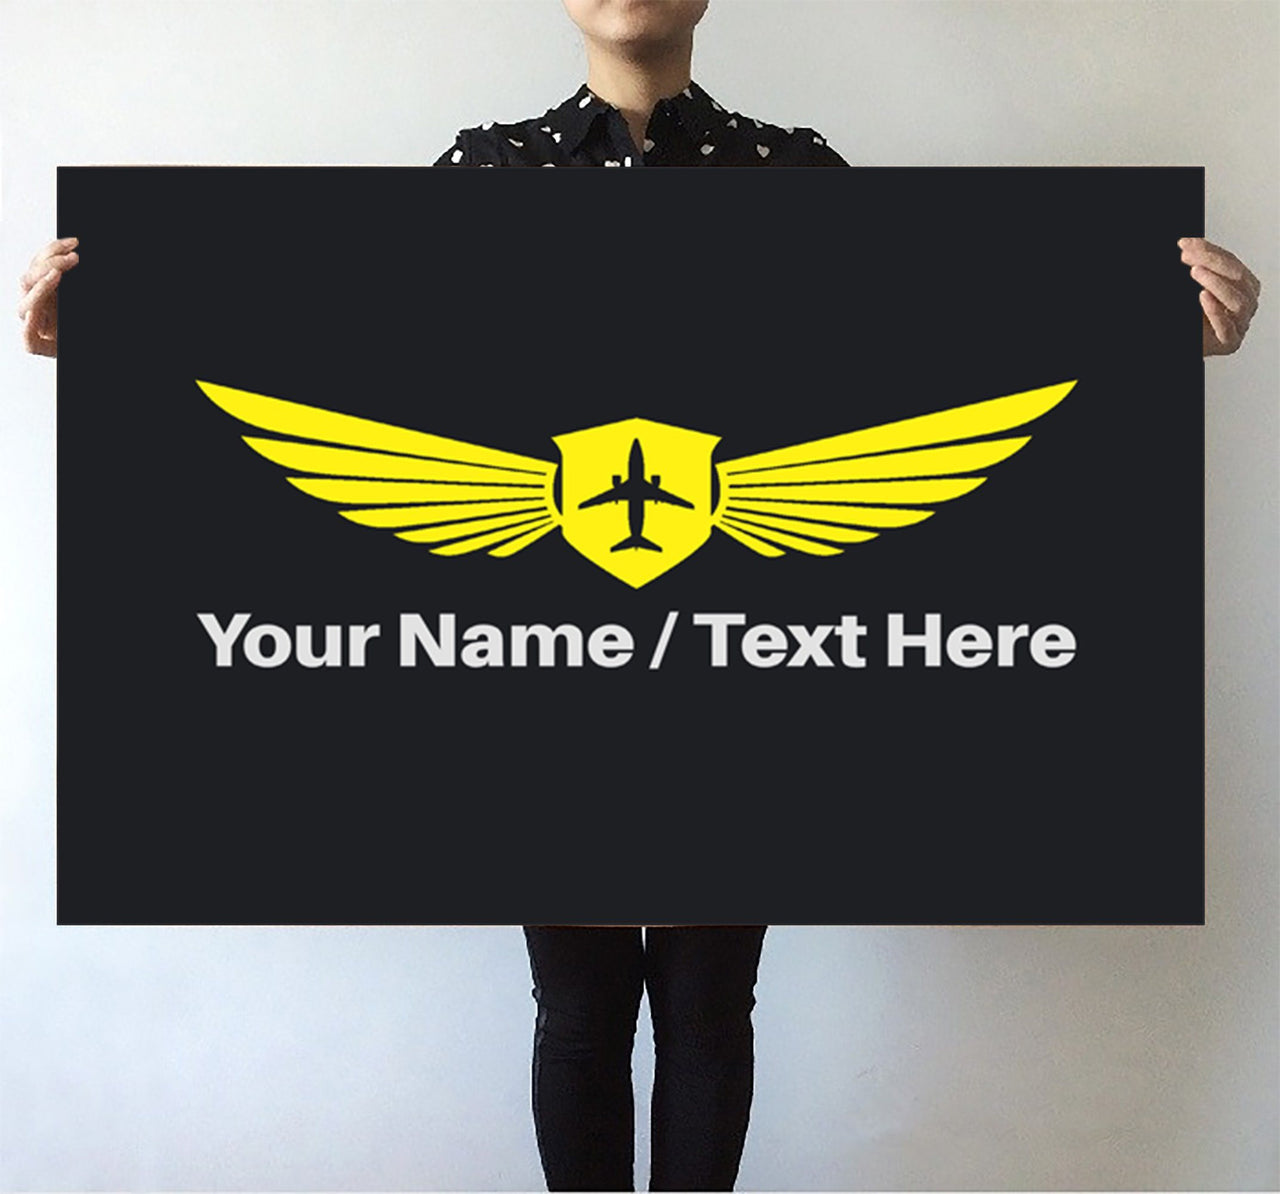 Customizable Name & Badge Printed Posters Aviation Shop 